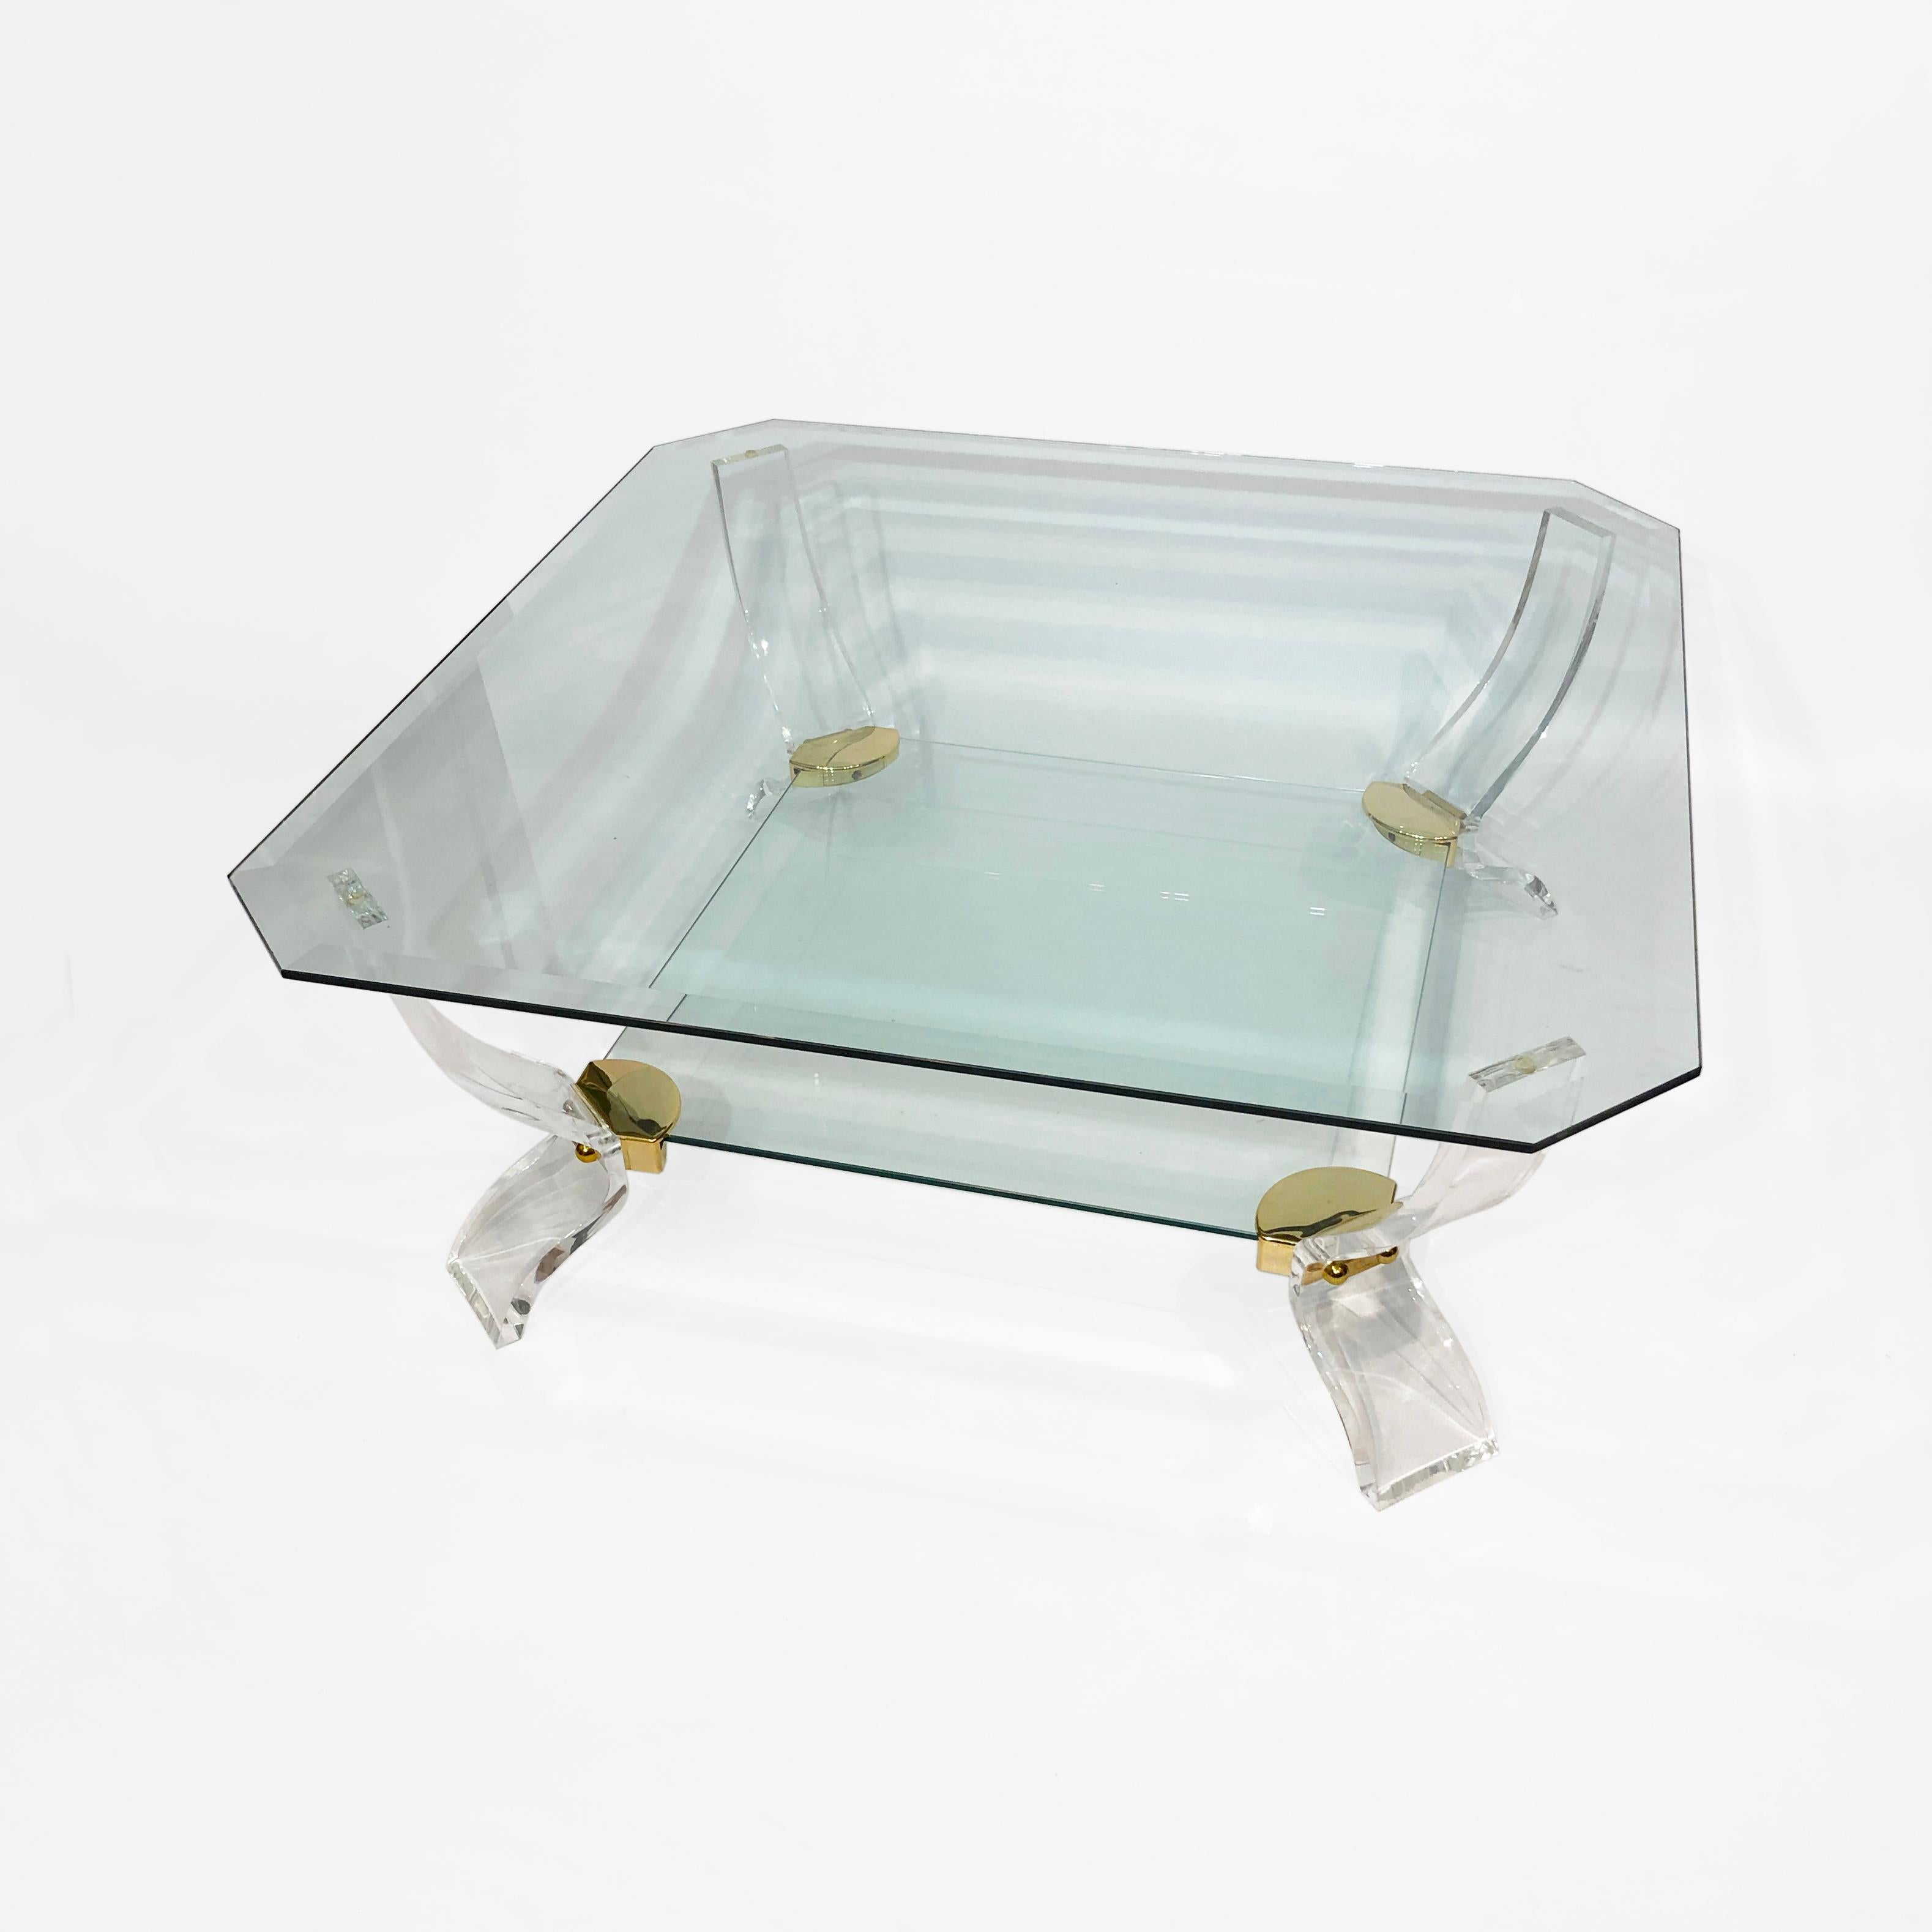 Spanish Lucite Glass brass Coffee Table 1980s Midcentury Charles Hollis Jones 1970s 80s  For Sale